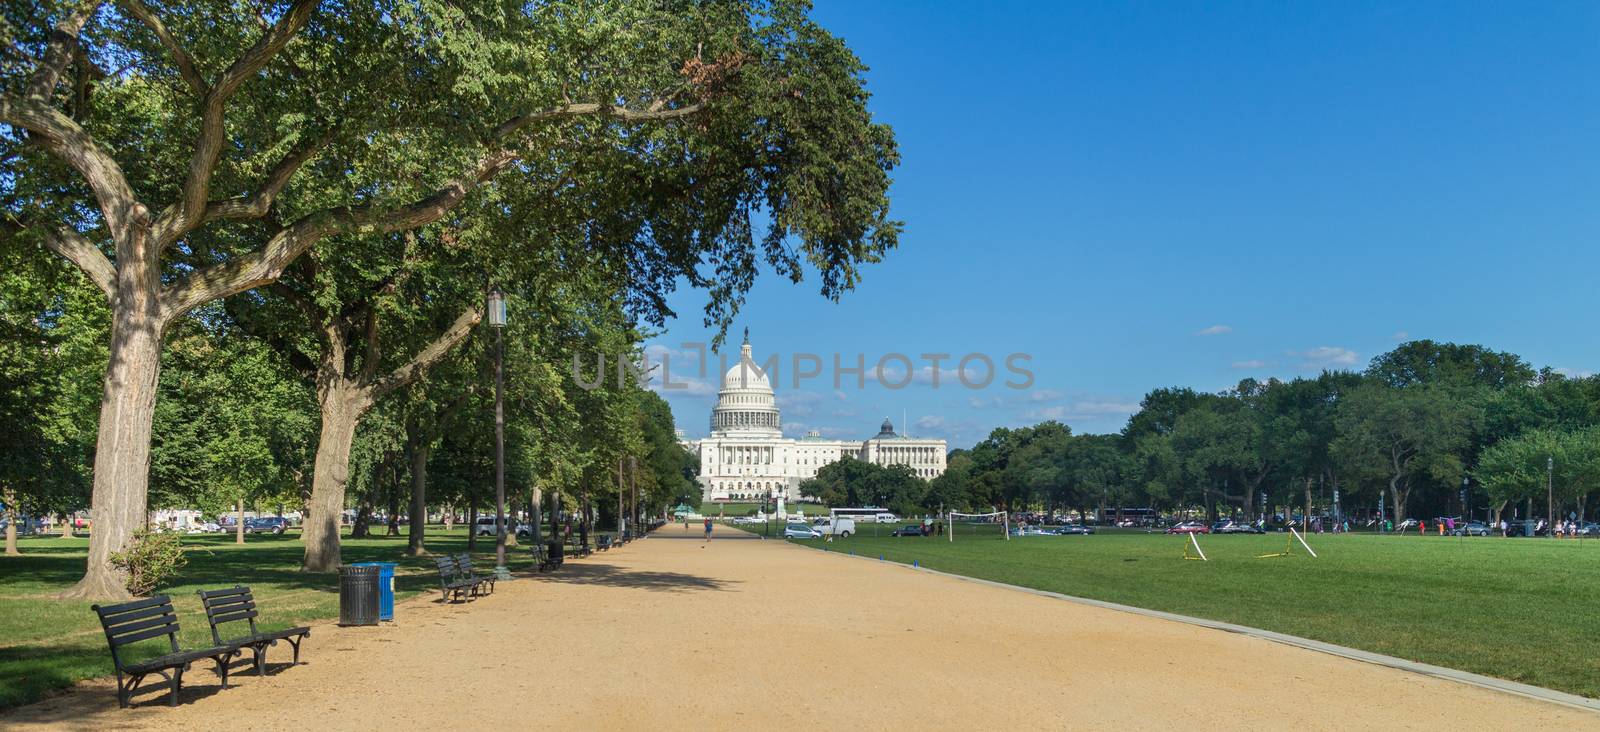 The iconic United States Capitol building overlooking the front lawn in Washington DC.